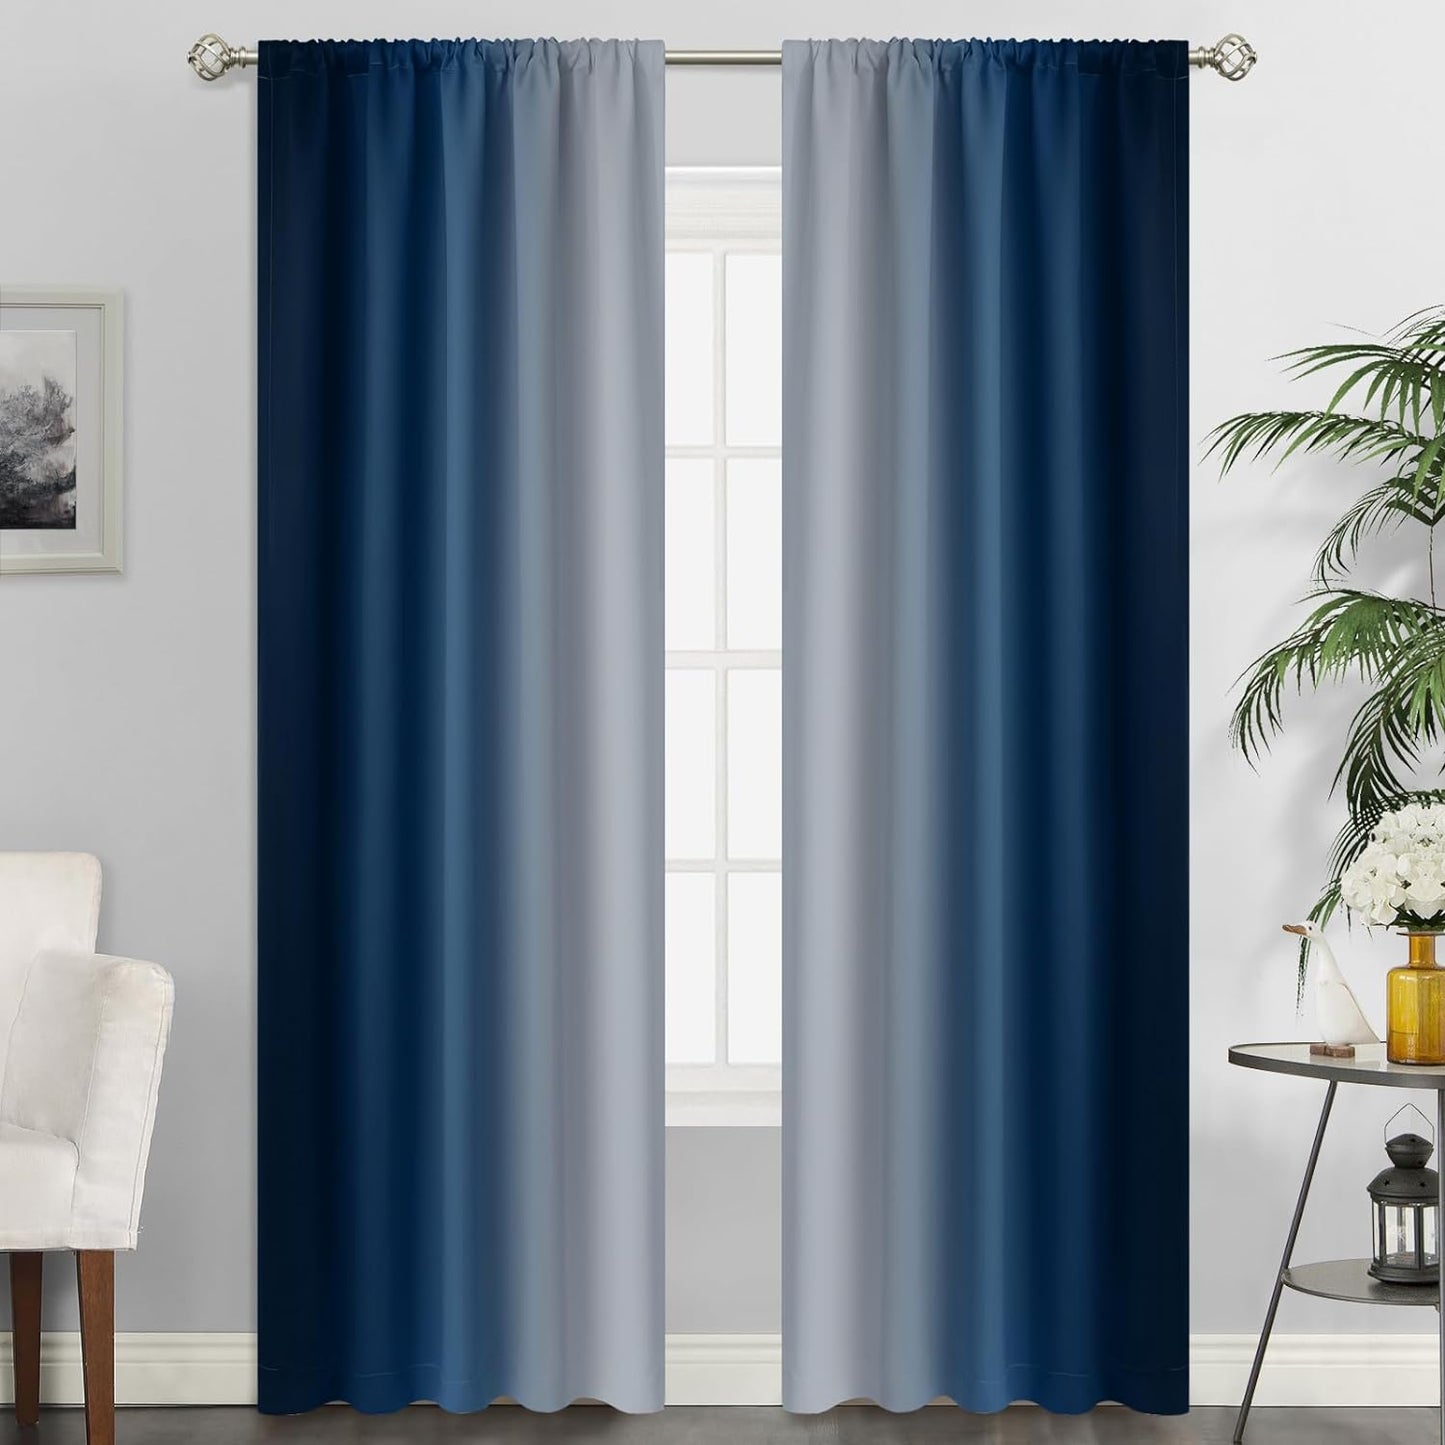 Simplehome Ombre Room Darkening Curtains for Bedroom, Light Blocking Gradient Purple to Greyish White Thermal Insulated Rod Pocket Window Curtains Drapes for Living Room,2 Panels, 52X84 Inches Length  SimpleHome Blue 52W X 84L / 2 Panels 